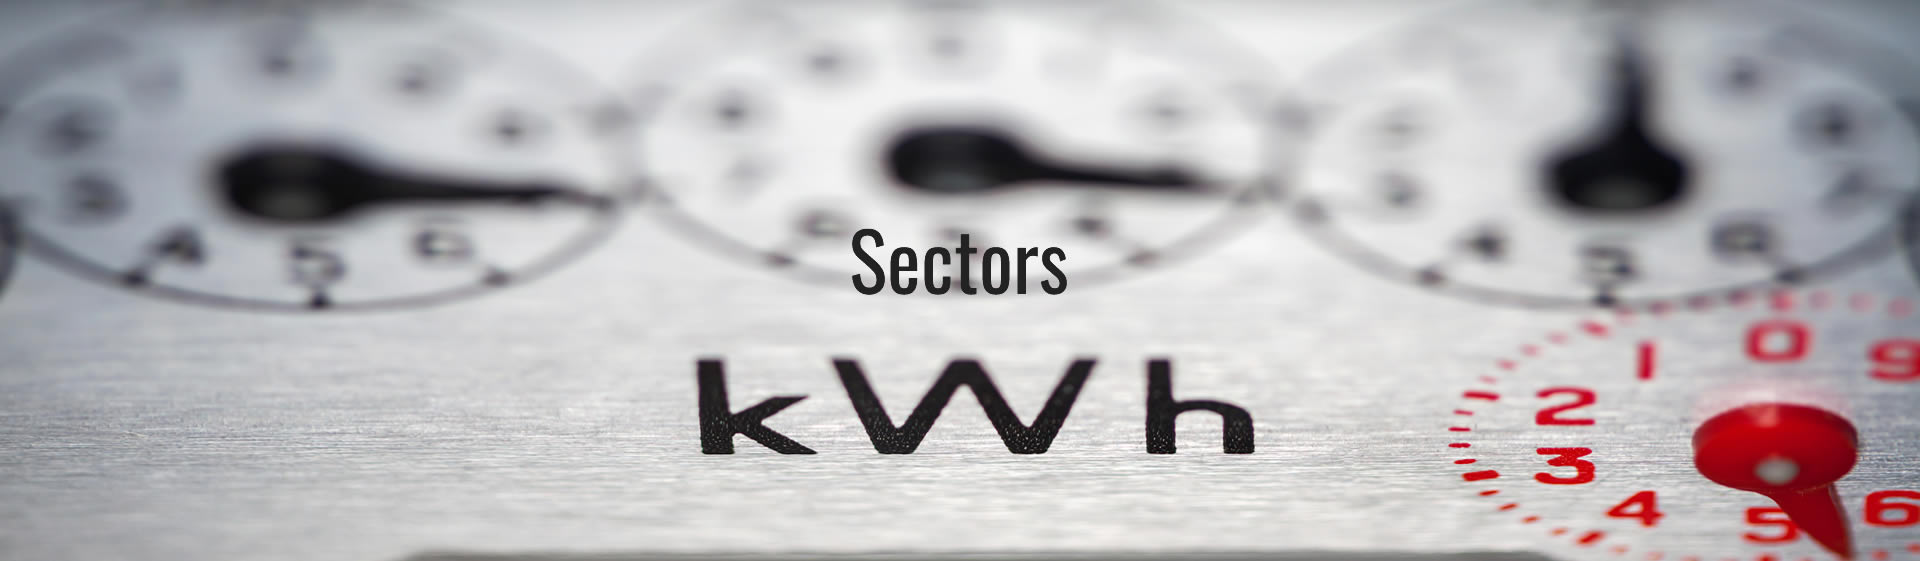 energy consulting sectors